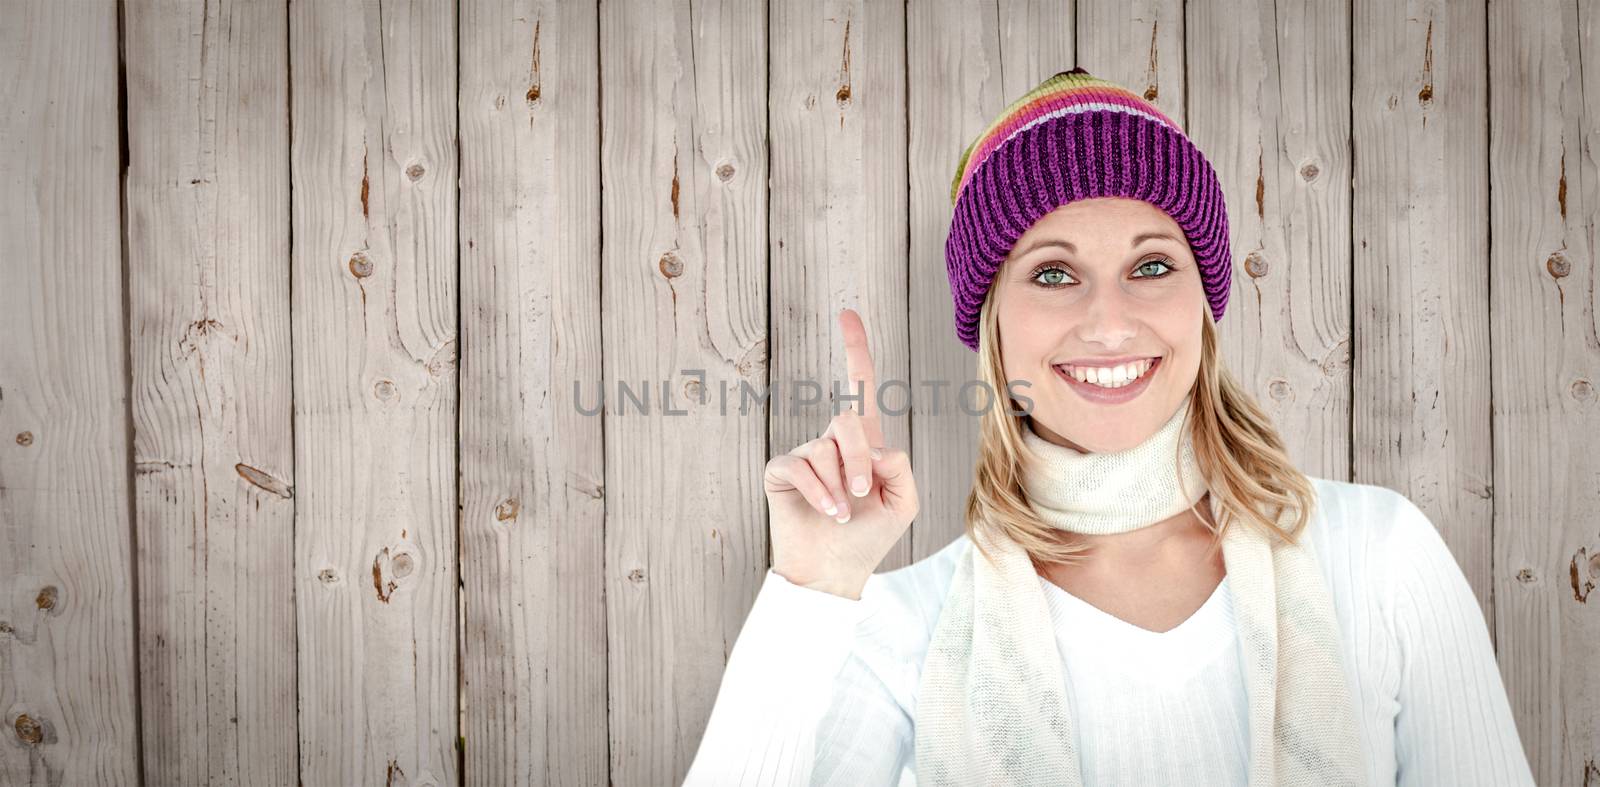 Joyful woman with a colorful hat pointing upwards against wooden background